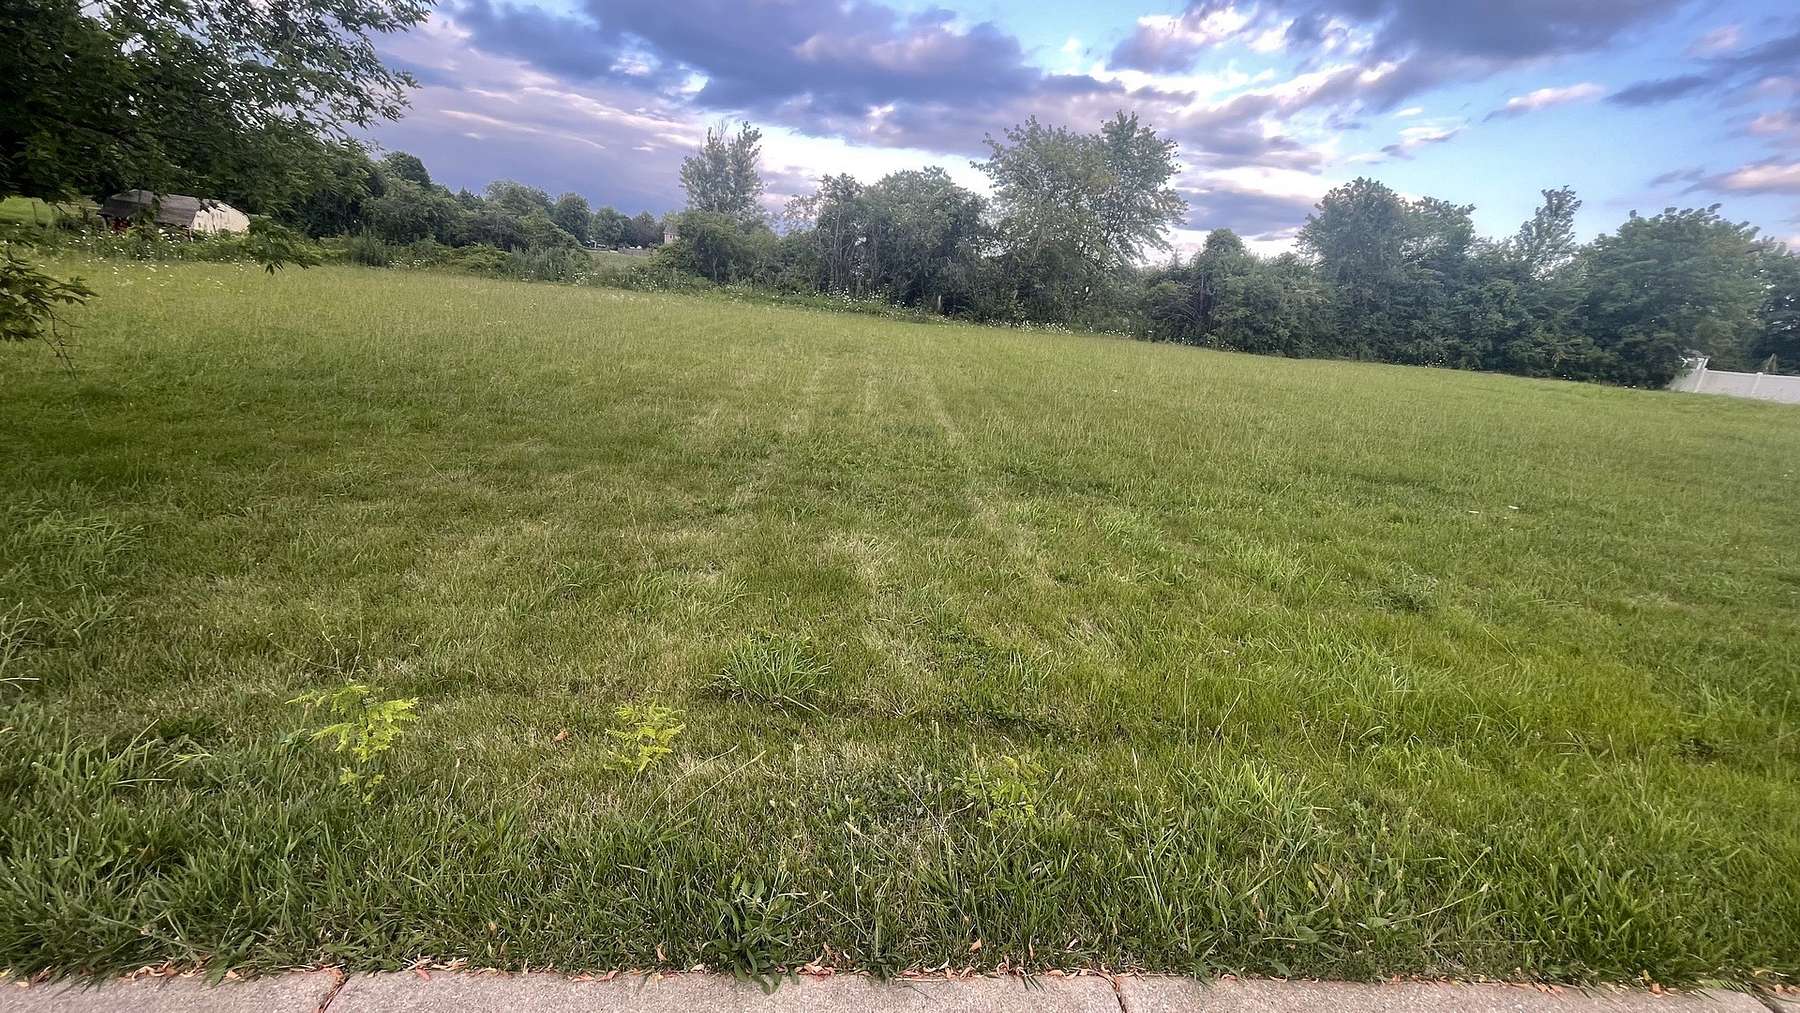 0.25 Acres of Residential Land for Sale in Gurnee, Illinois